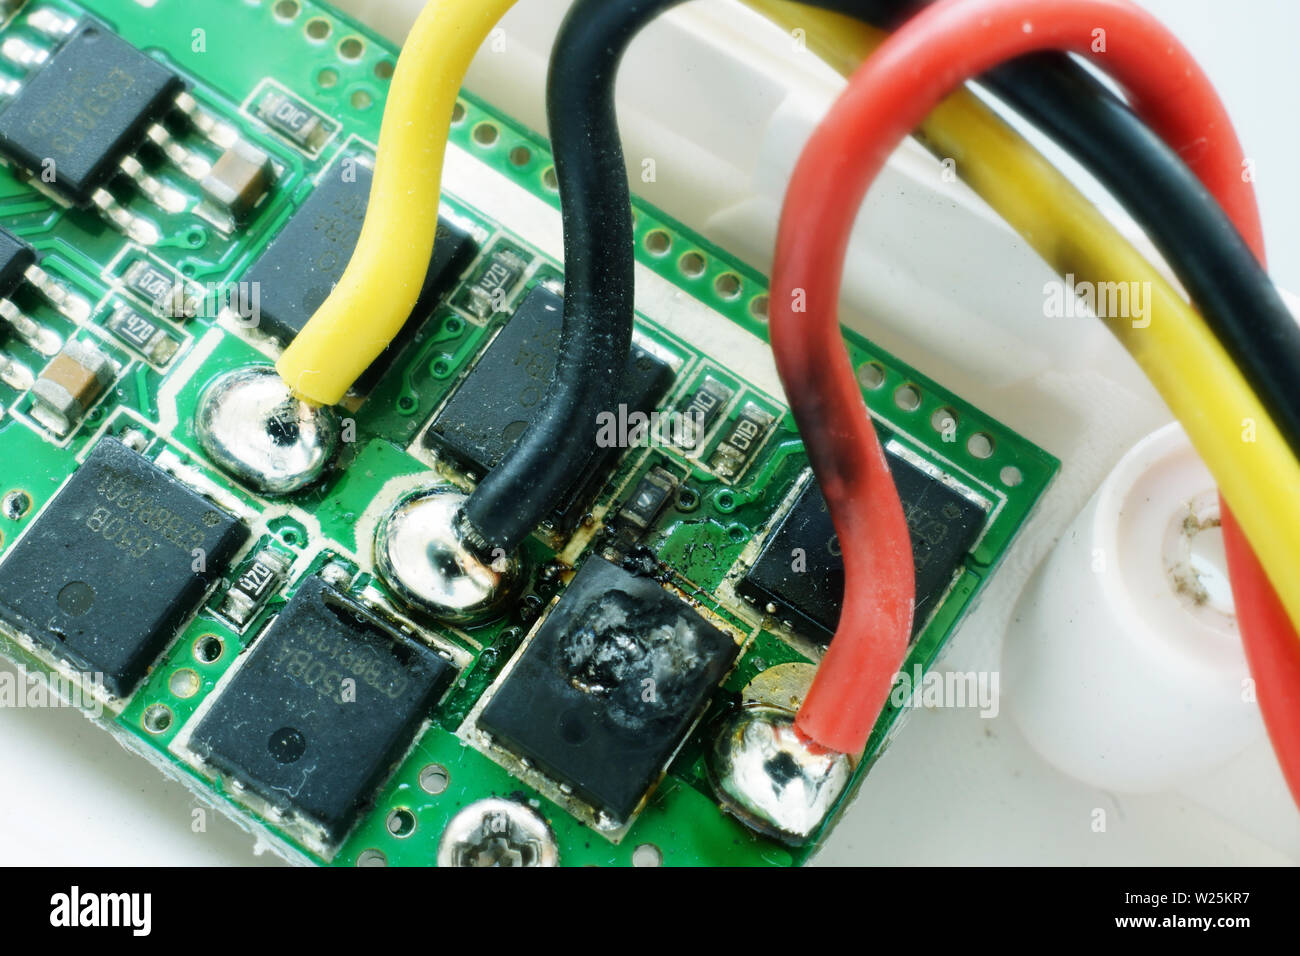 Microcircuit with a burnt-out microchip. Breakdown of electronic equipment. Stock Photo